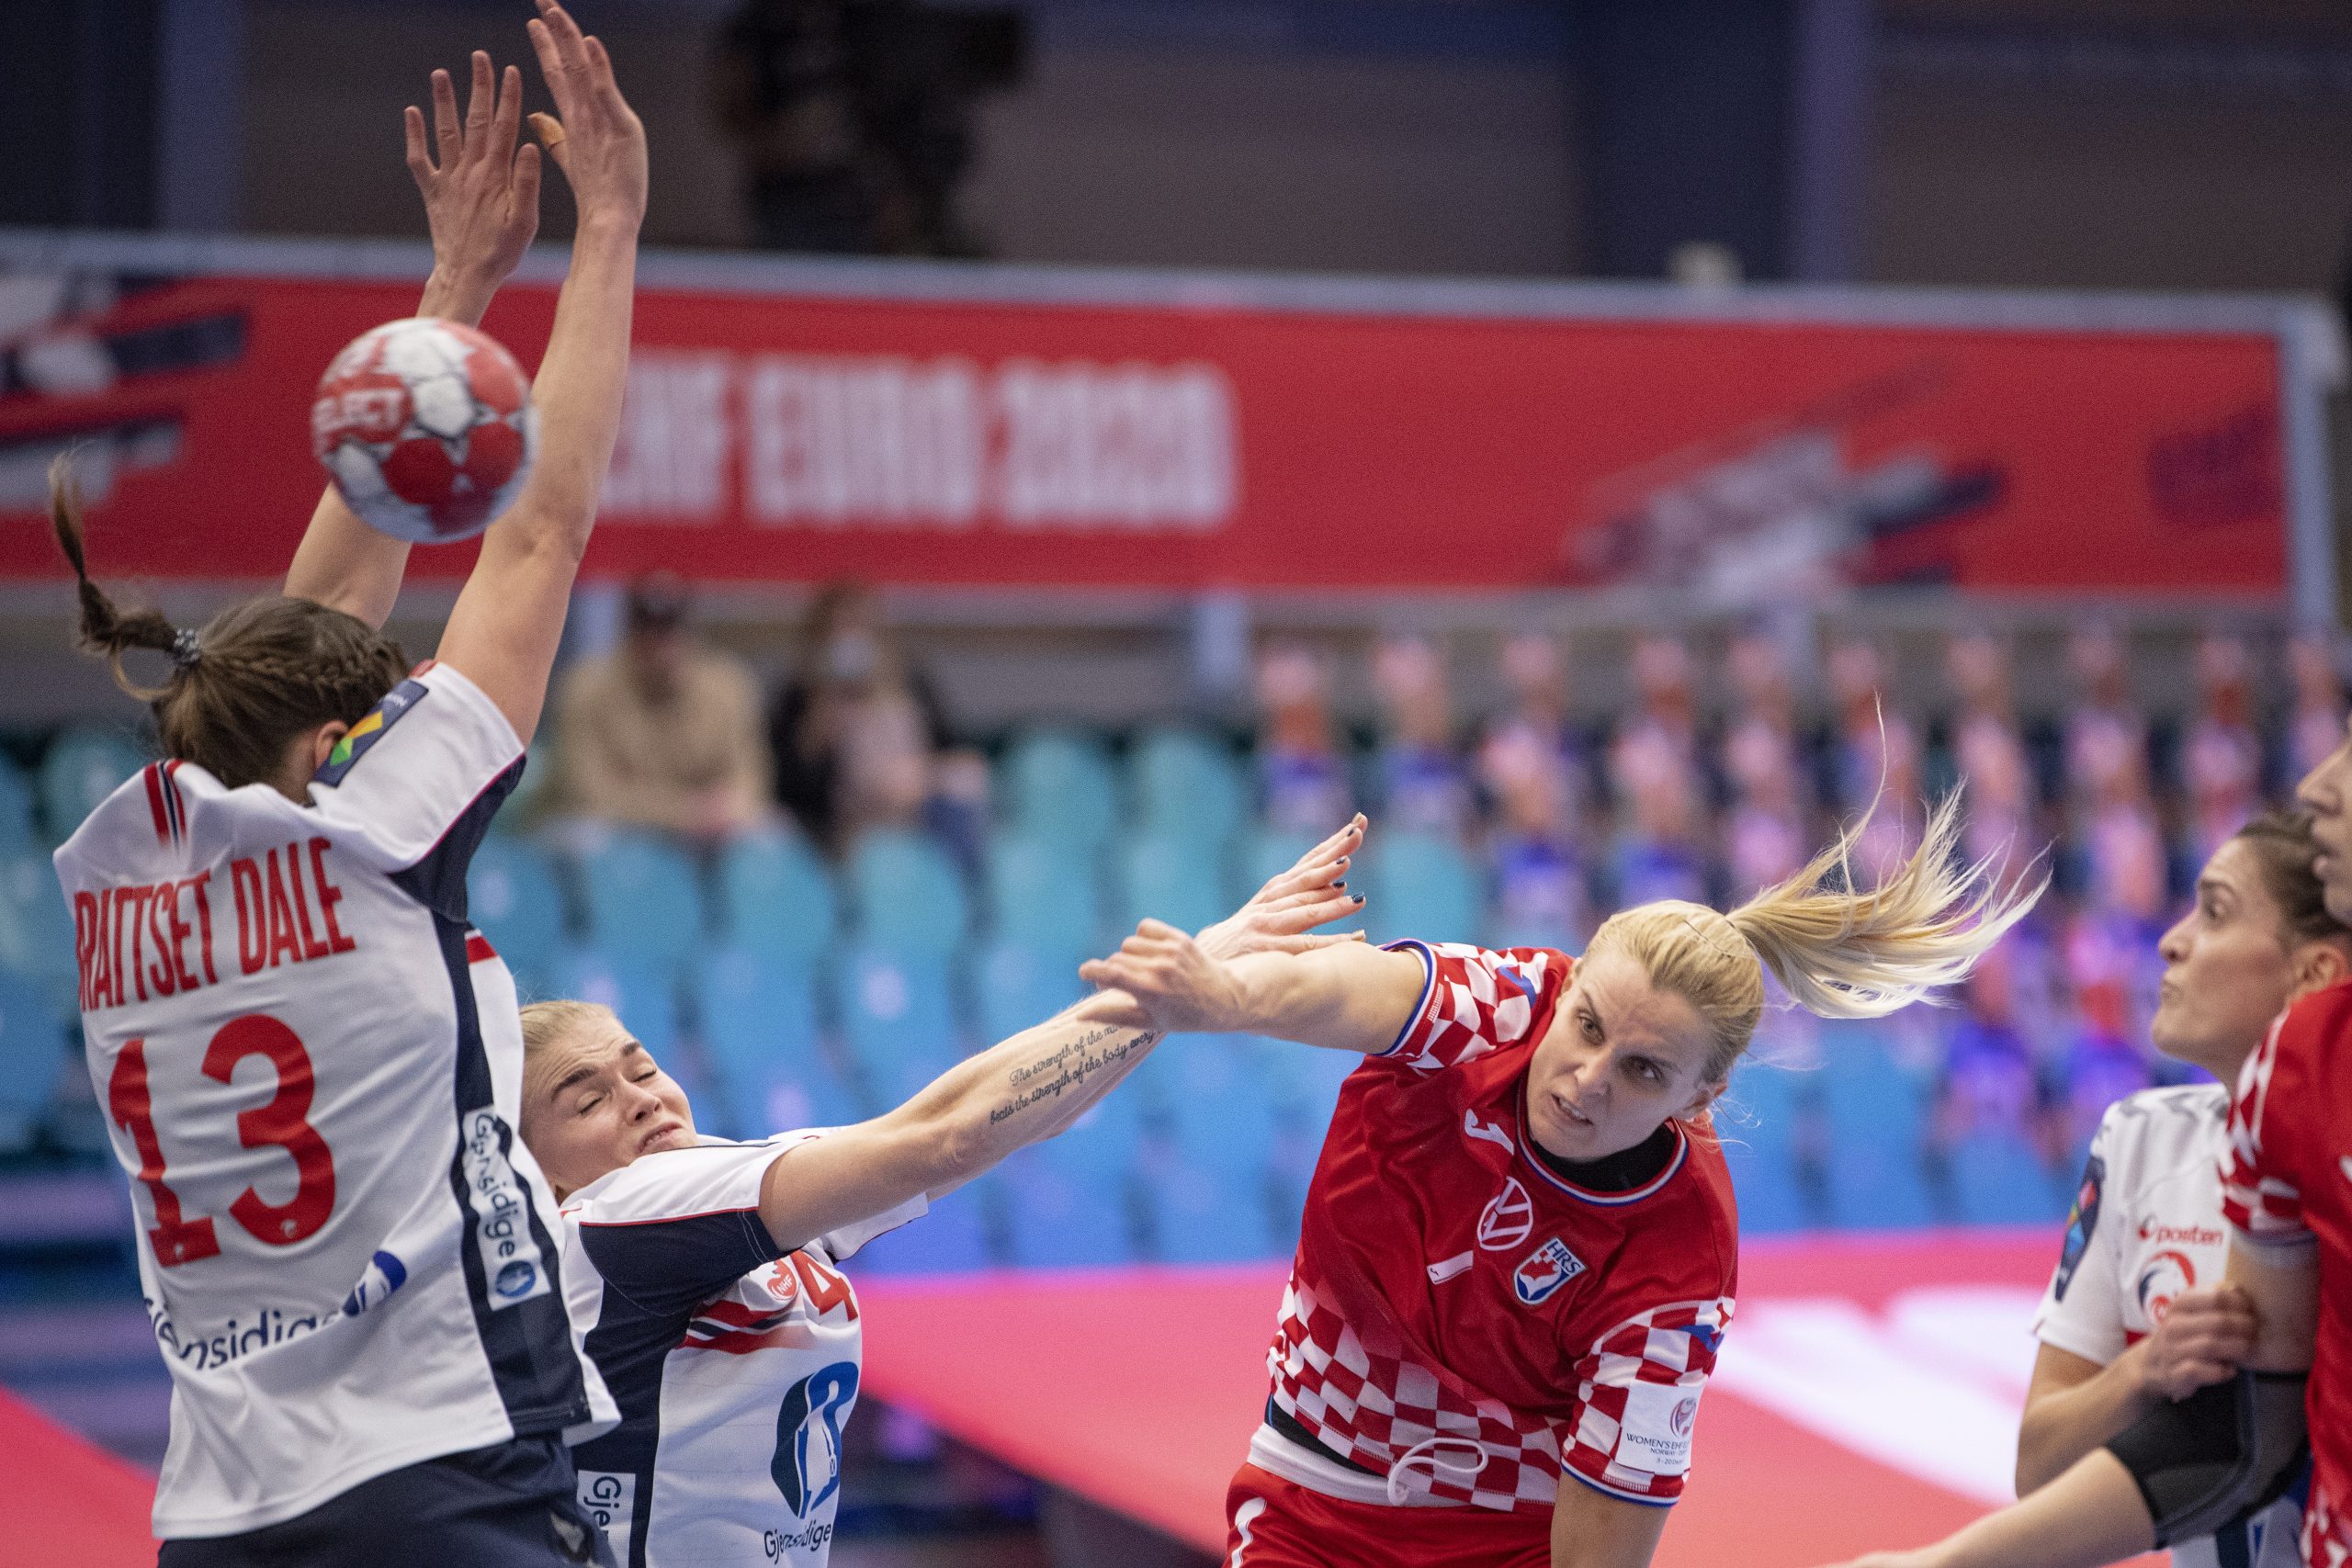 epa08880269 Dora Krsnik (C) of Croatia in action with Veronica E. Kristiansen (2-L) and Kari Brattset Dale (L) of Norway during the EHF EURO 2020 European Women's Handball Main Round - Group II match between Croatia and Norway at Sydbank Arena in Kolding, Denmark, 12 December 2020.  EPA/Bo Amstrup  DENMARK OUT